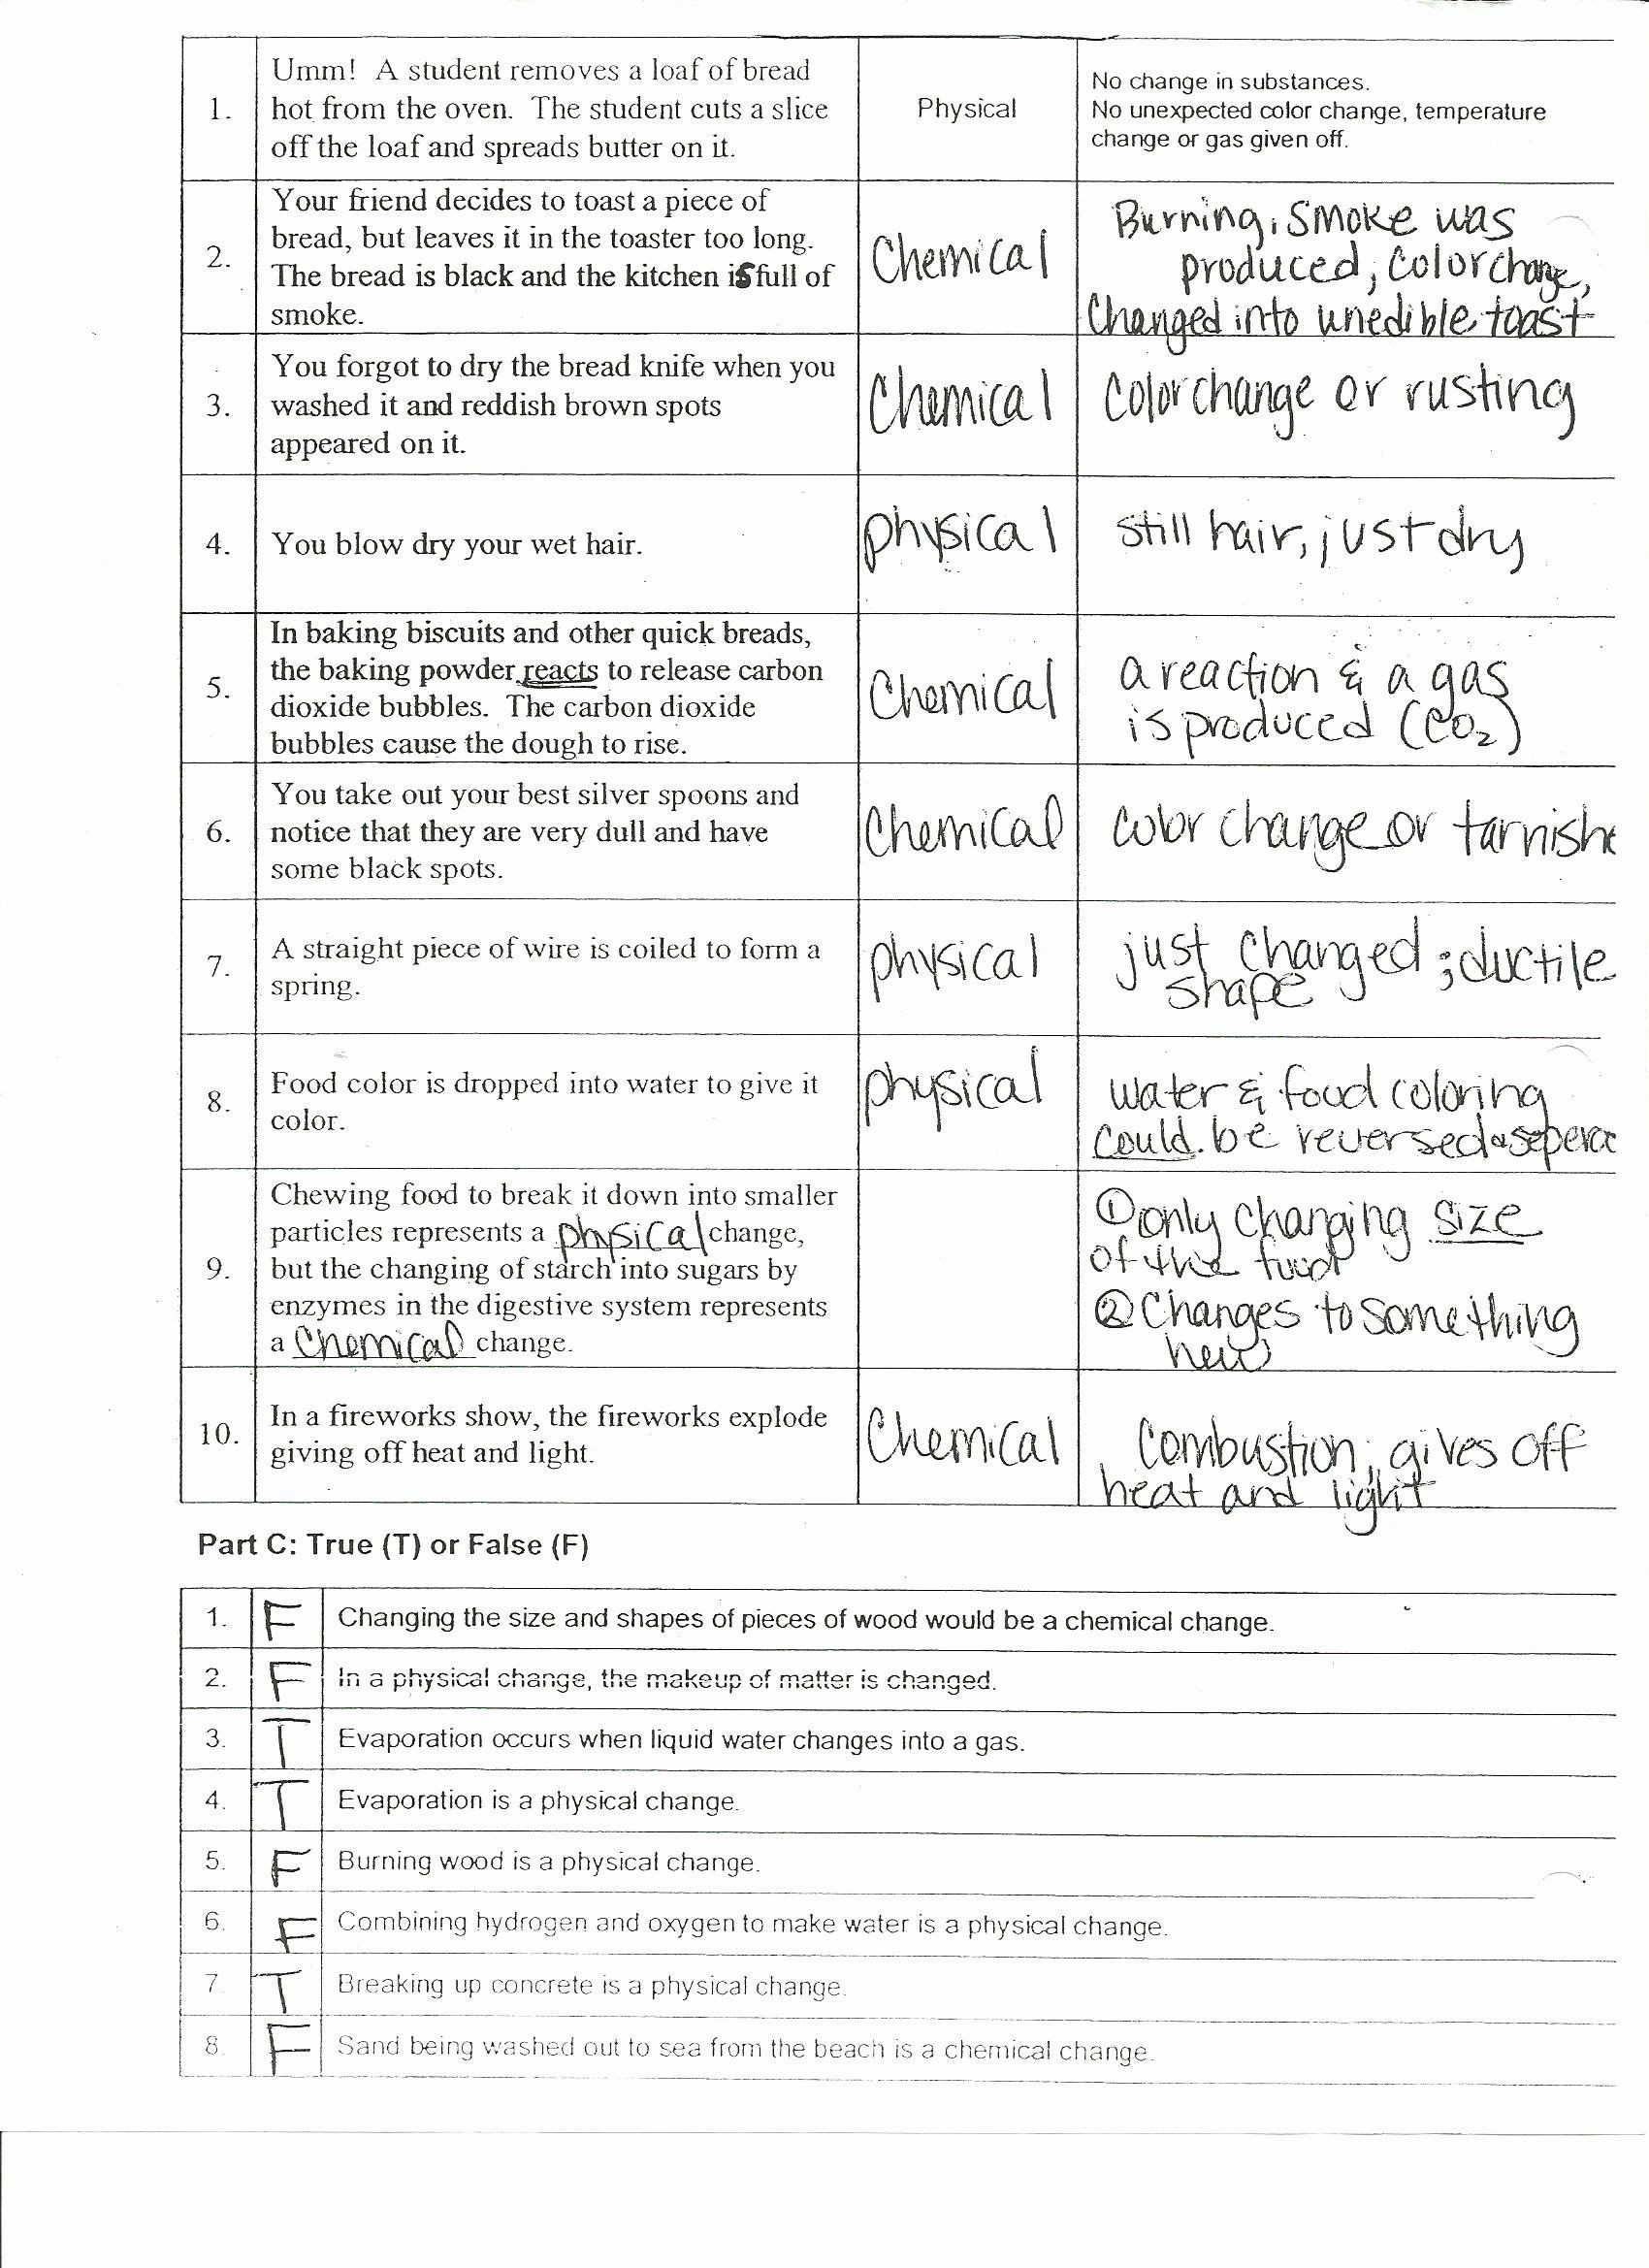 Physical and Chemical Change Worksheet 50 Physical and Chemical Change Worksheet In 2020 with